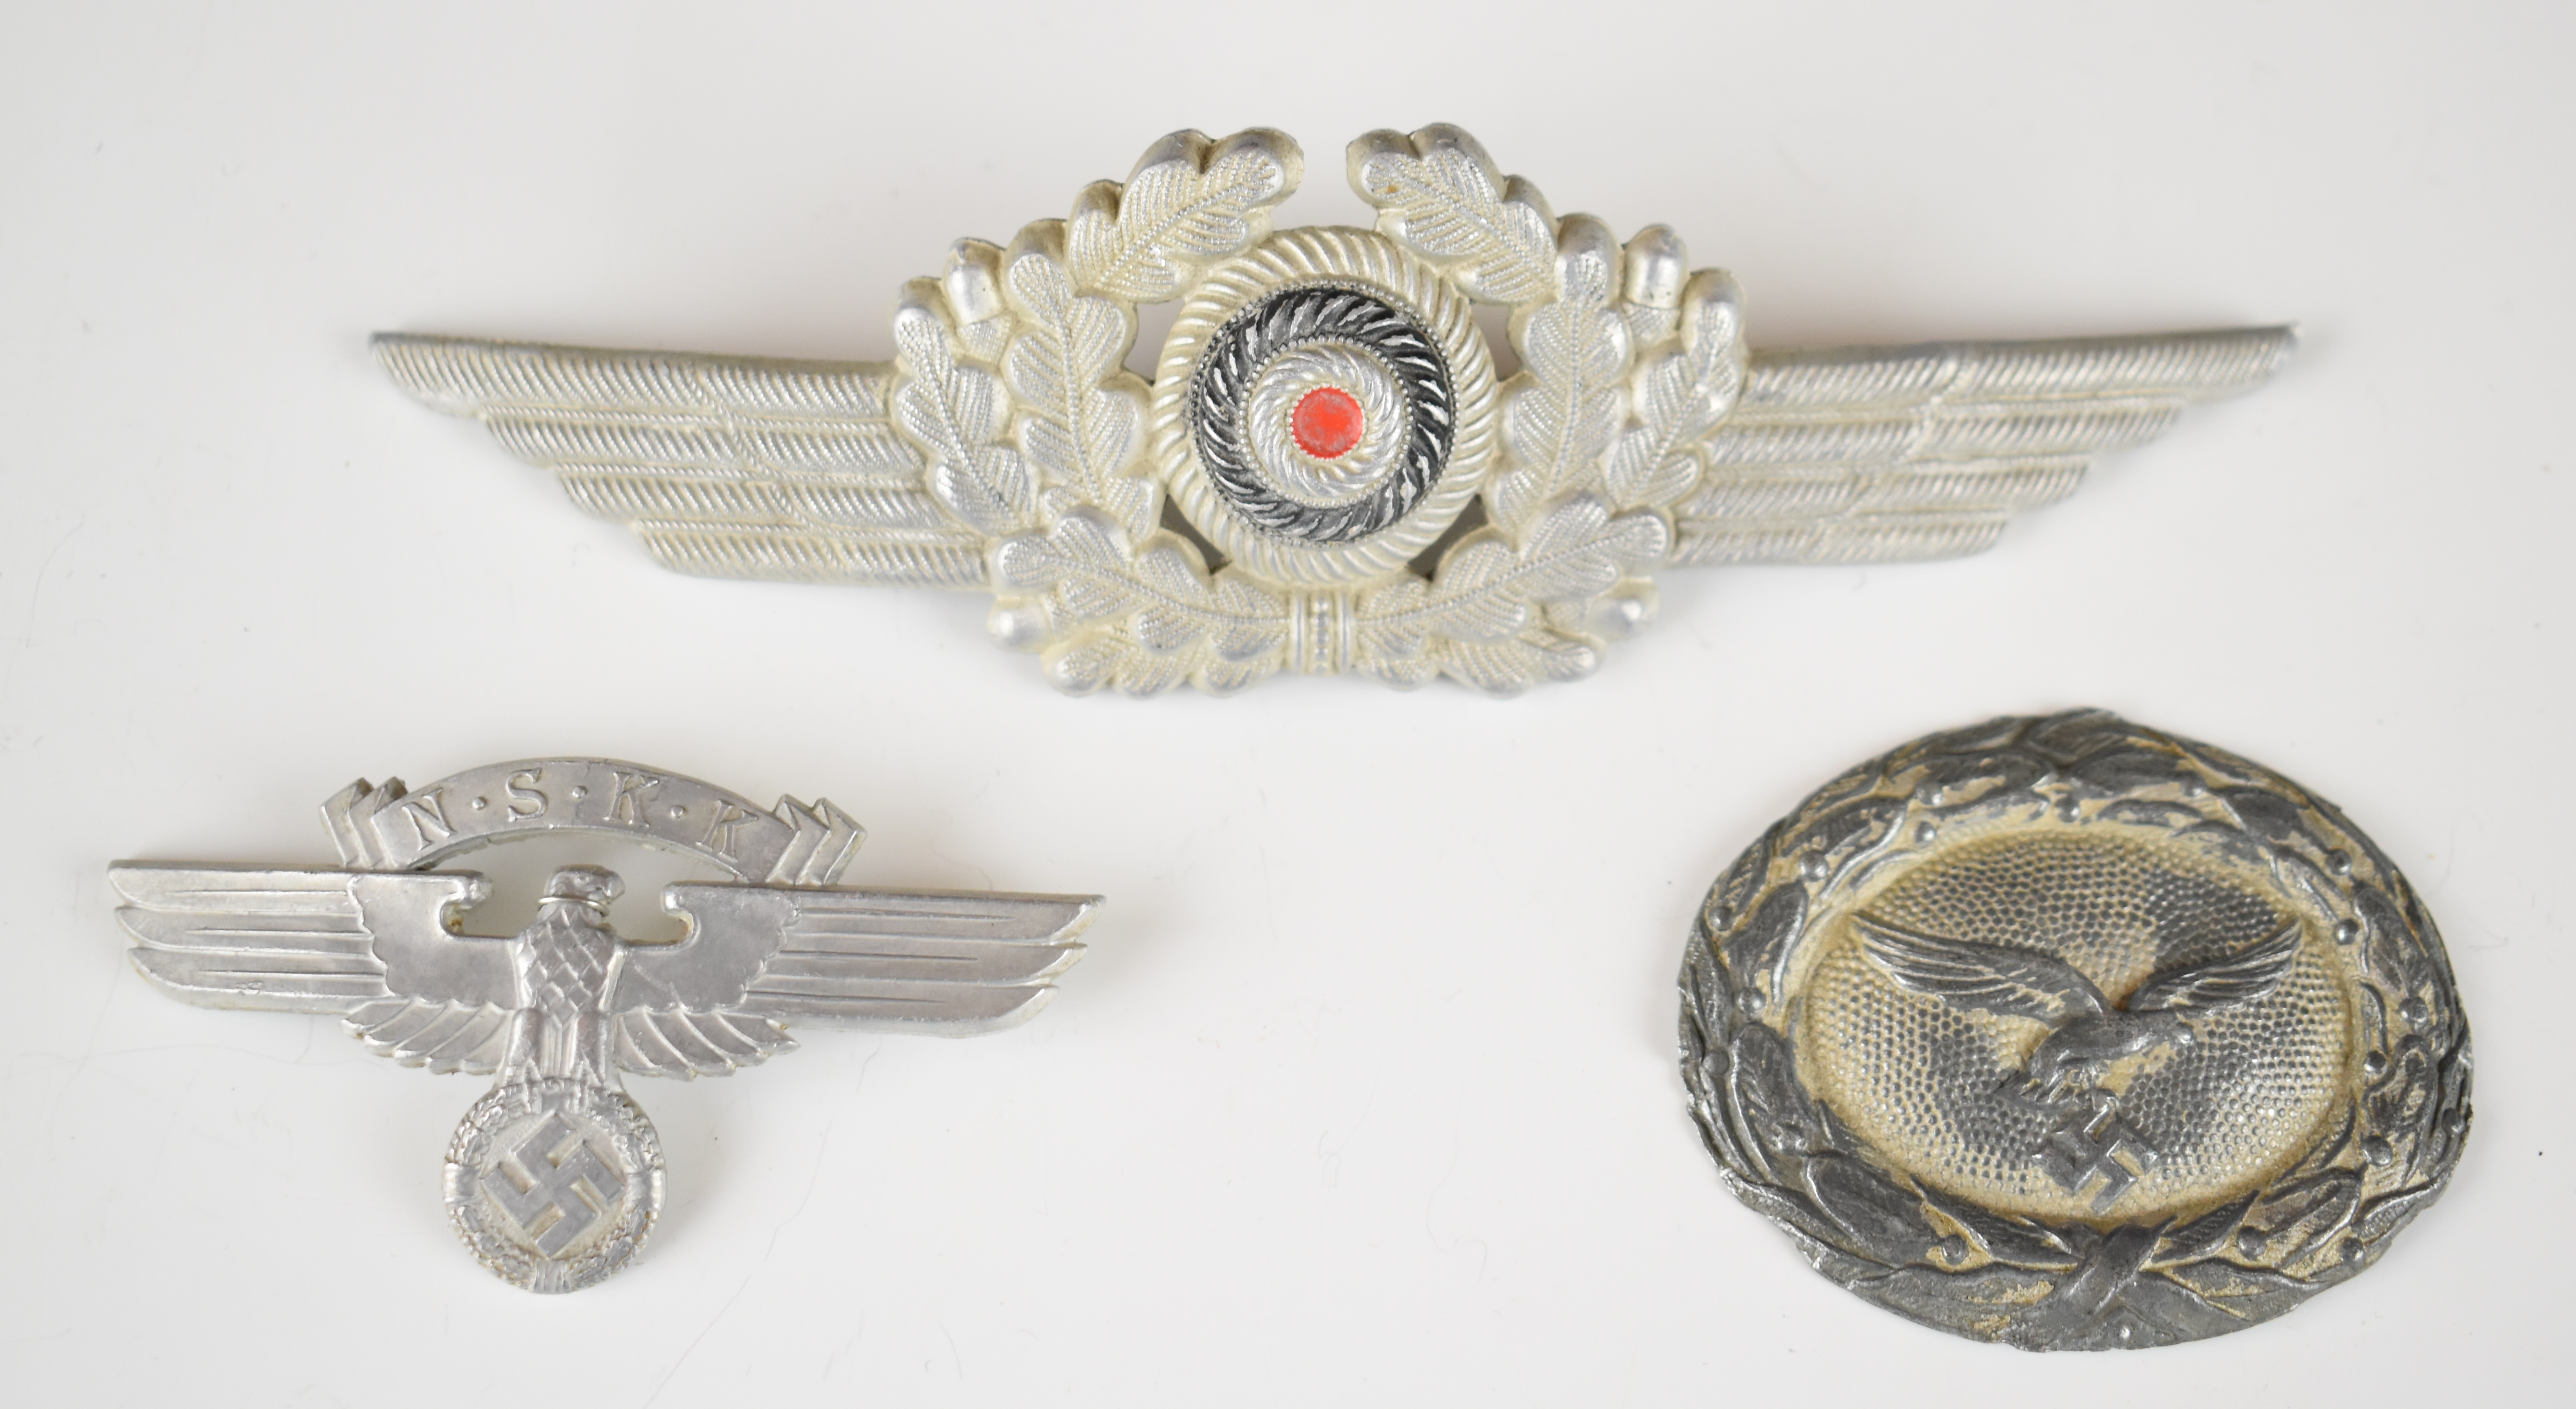 Two German WW2 Nazi Third Reich Luftwaffe badges and a NSKK example